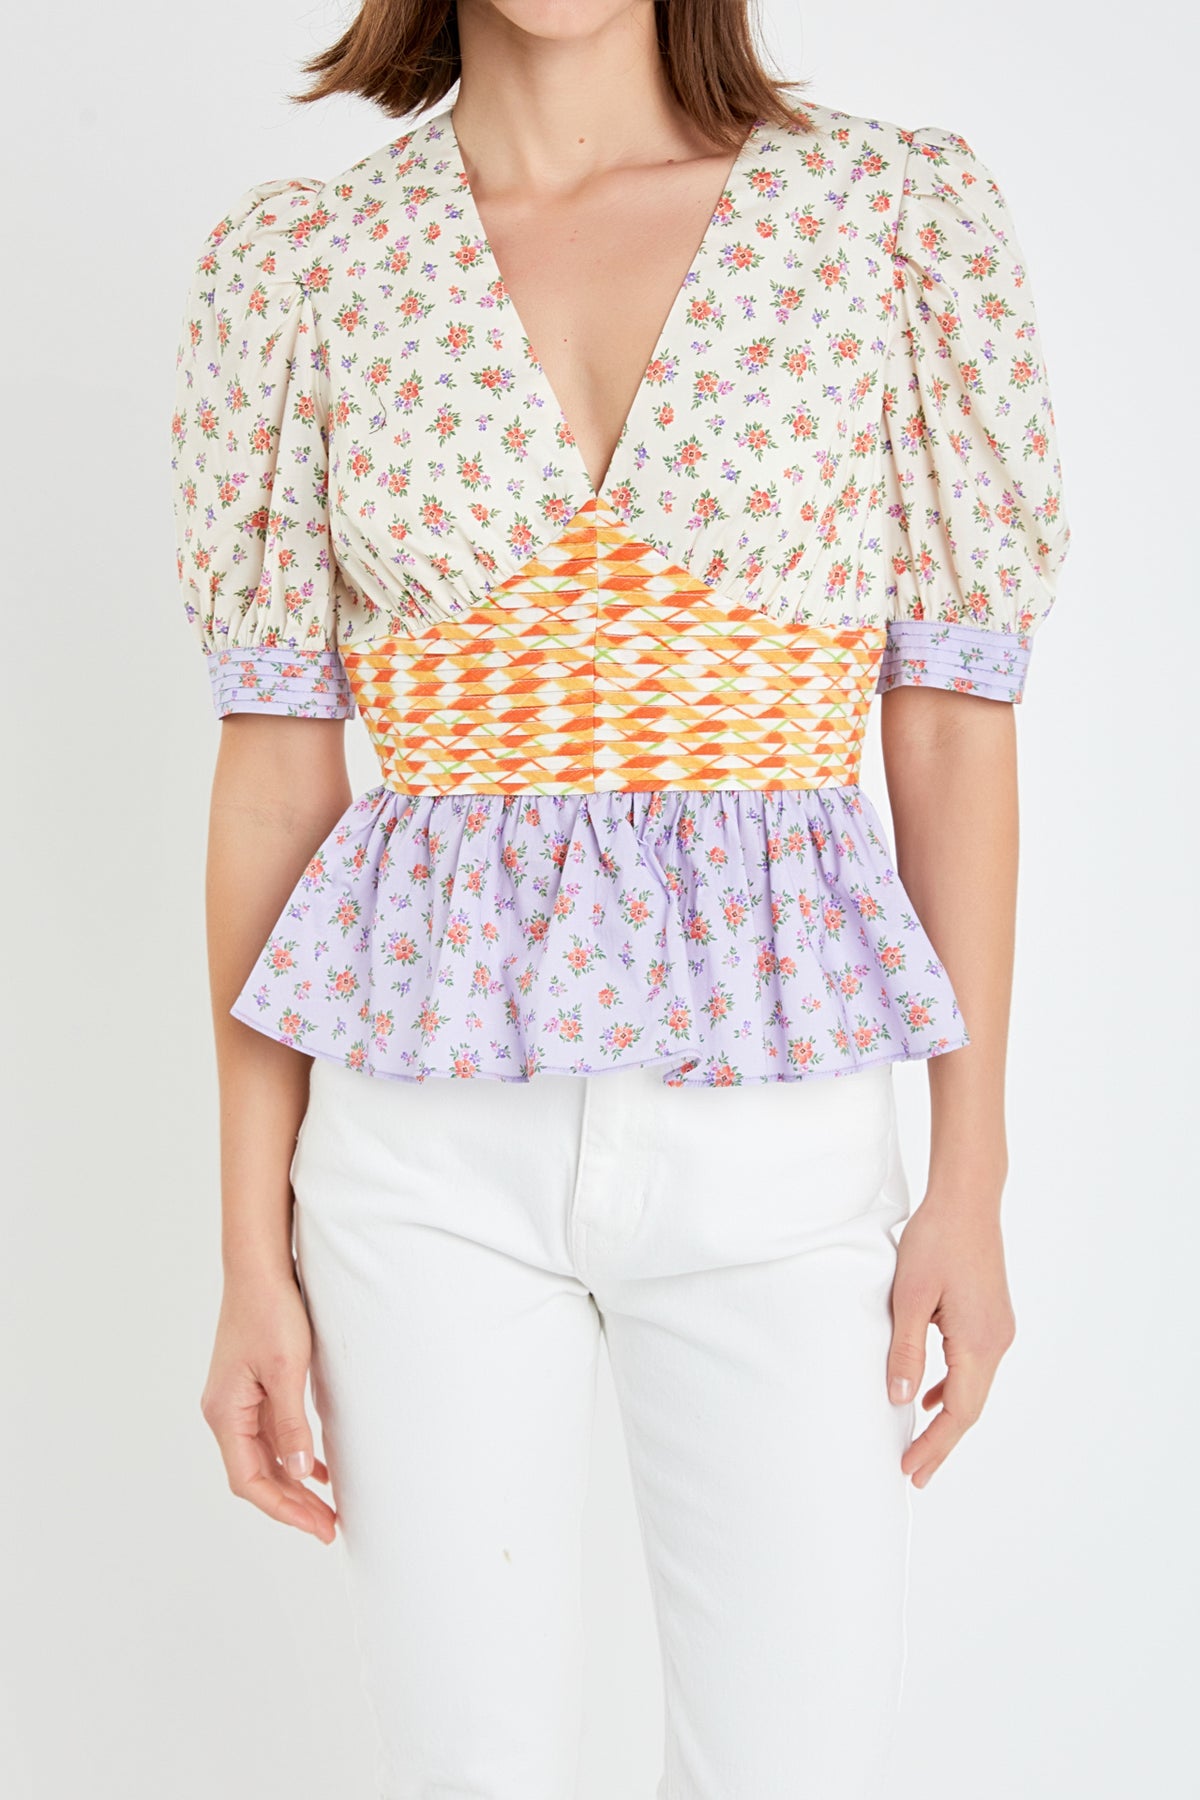 ENGLISH FACTORY - Mixed Floral Print Top - TOPS available at Objectrare